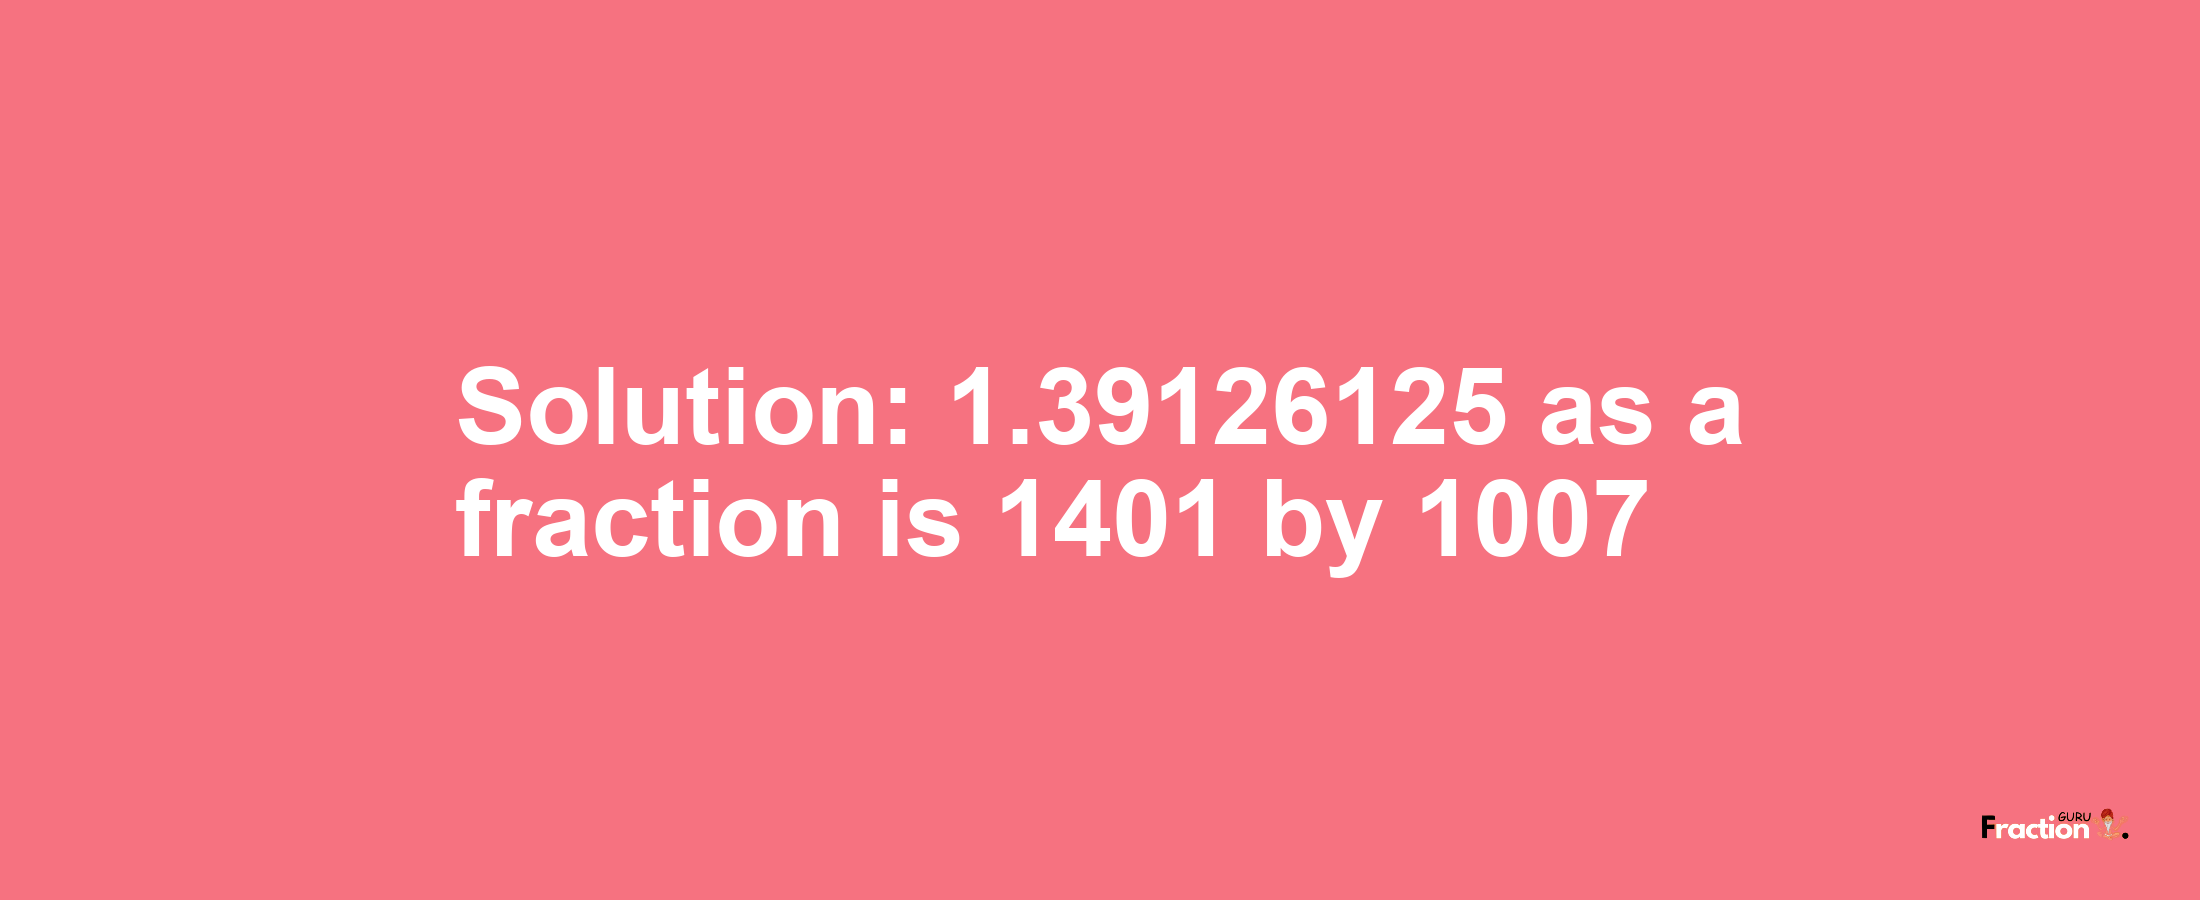 Solution:1.39126125 as a fraction is 1401/1007